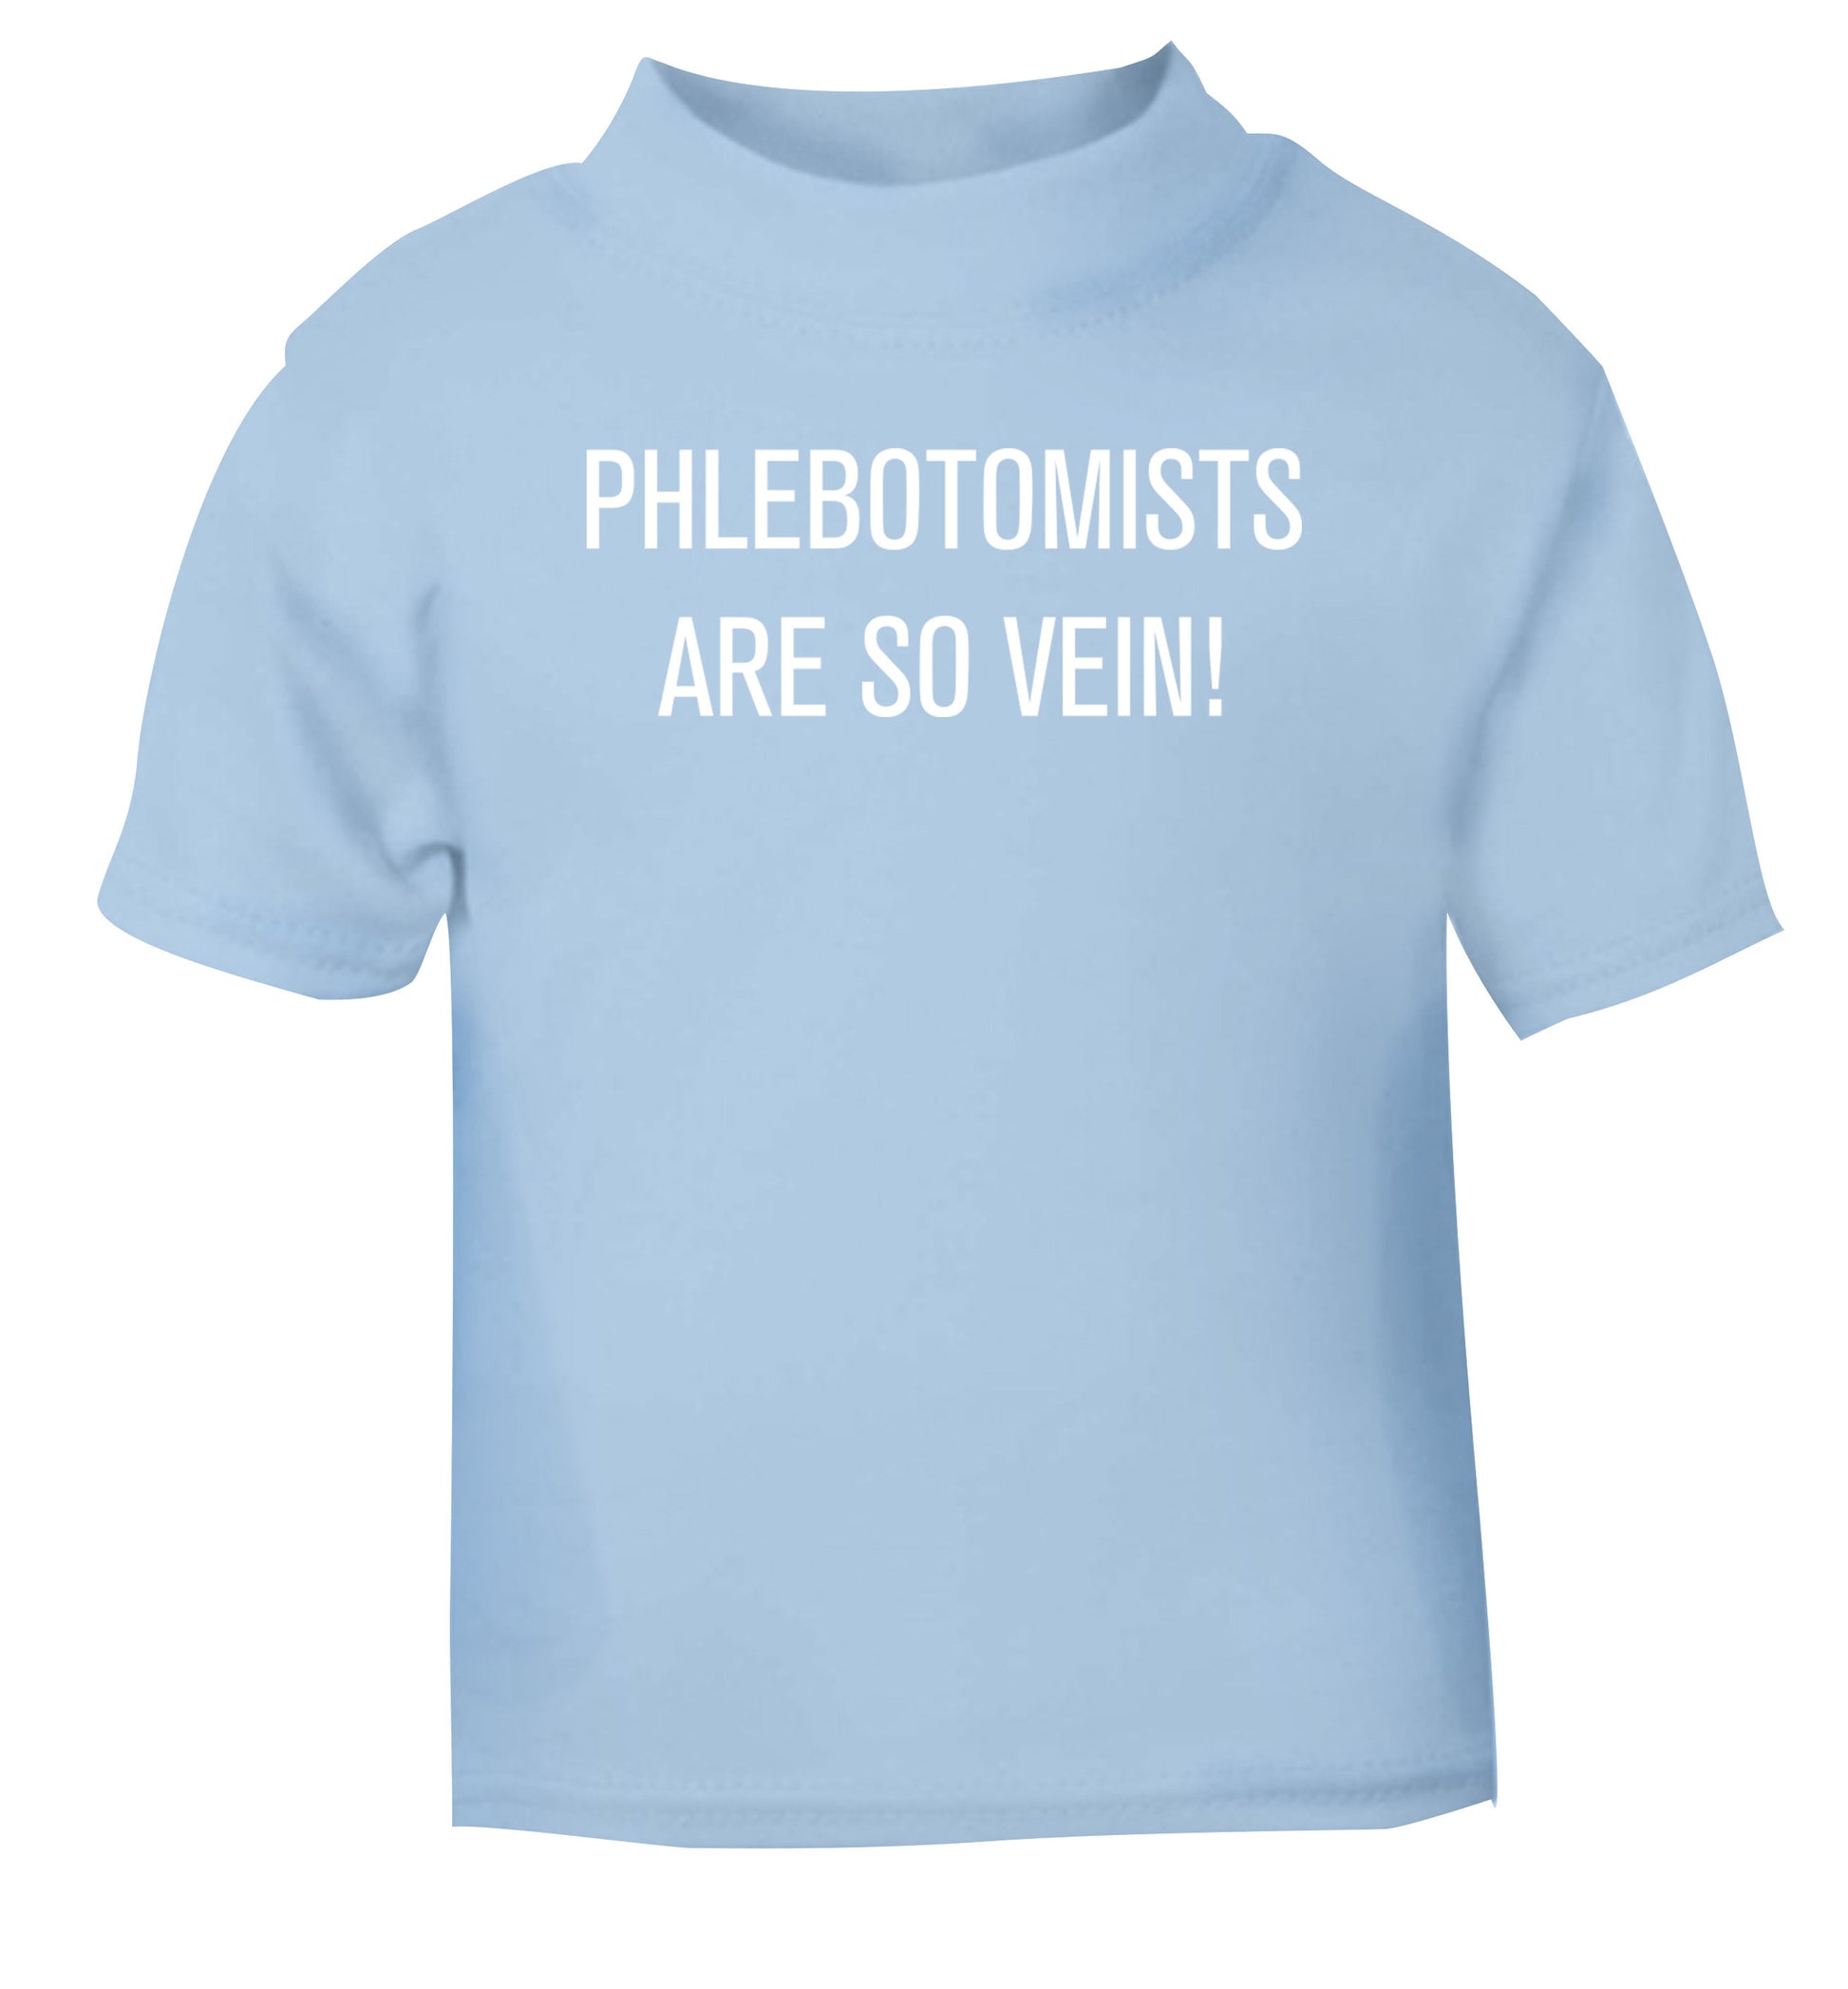 Phlebotomists are so vein! light blue Baby Toddler Tshirt 2 Years